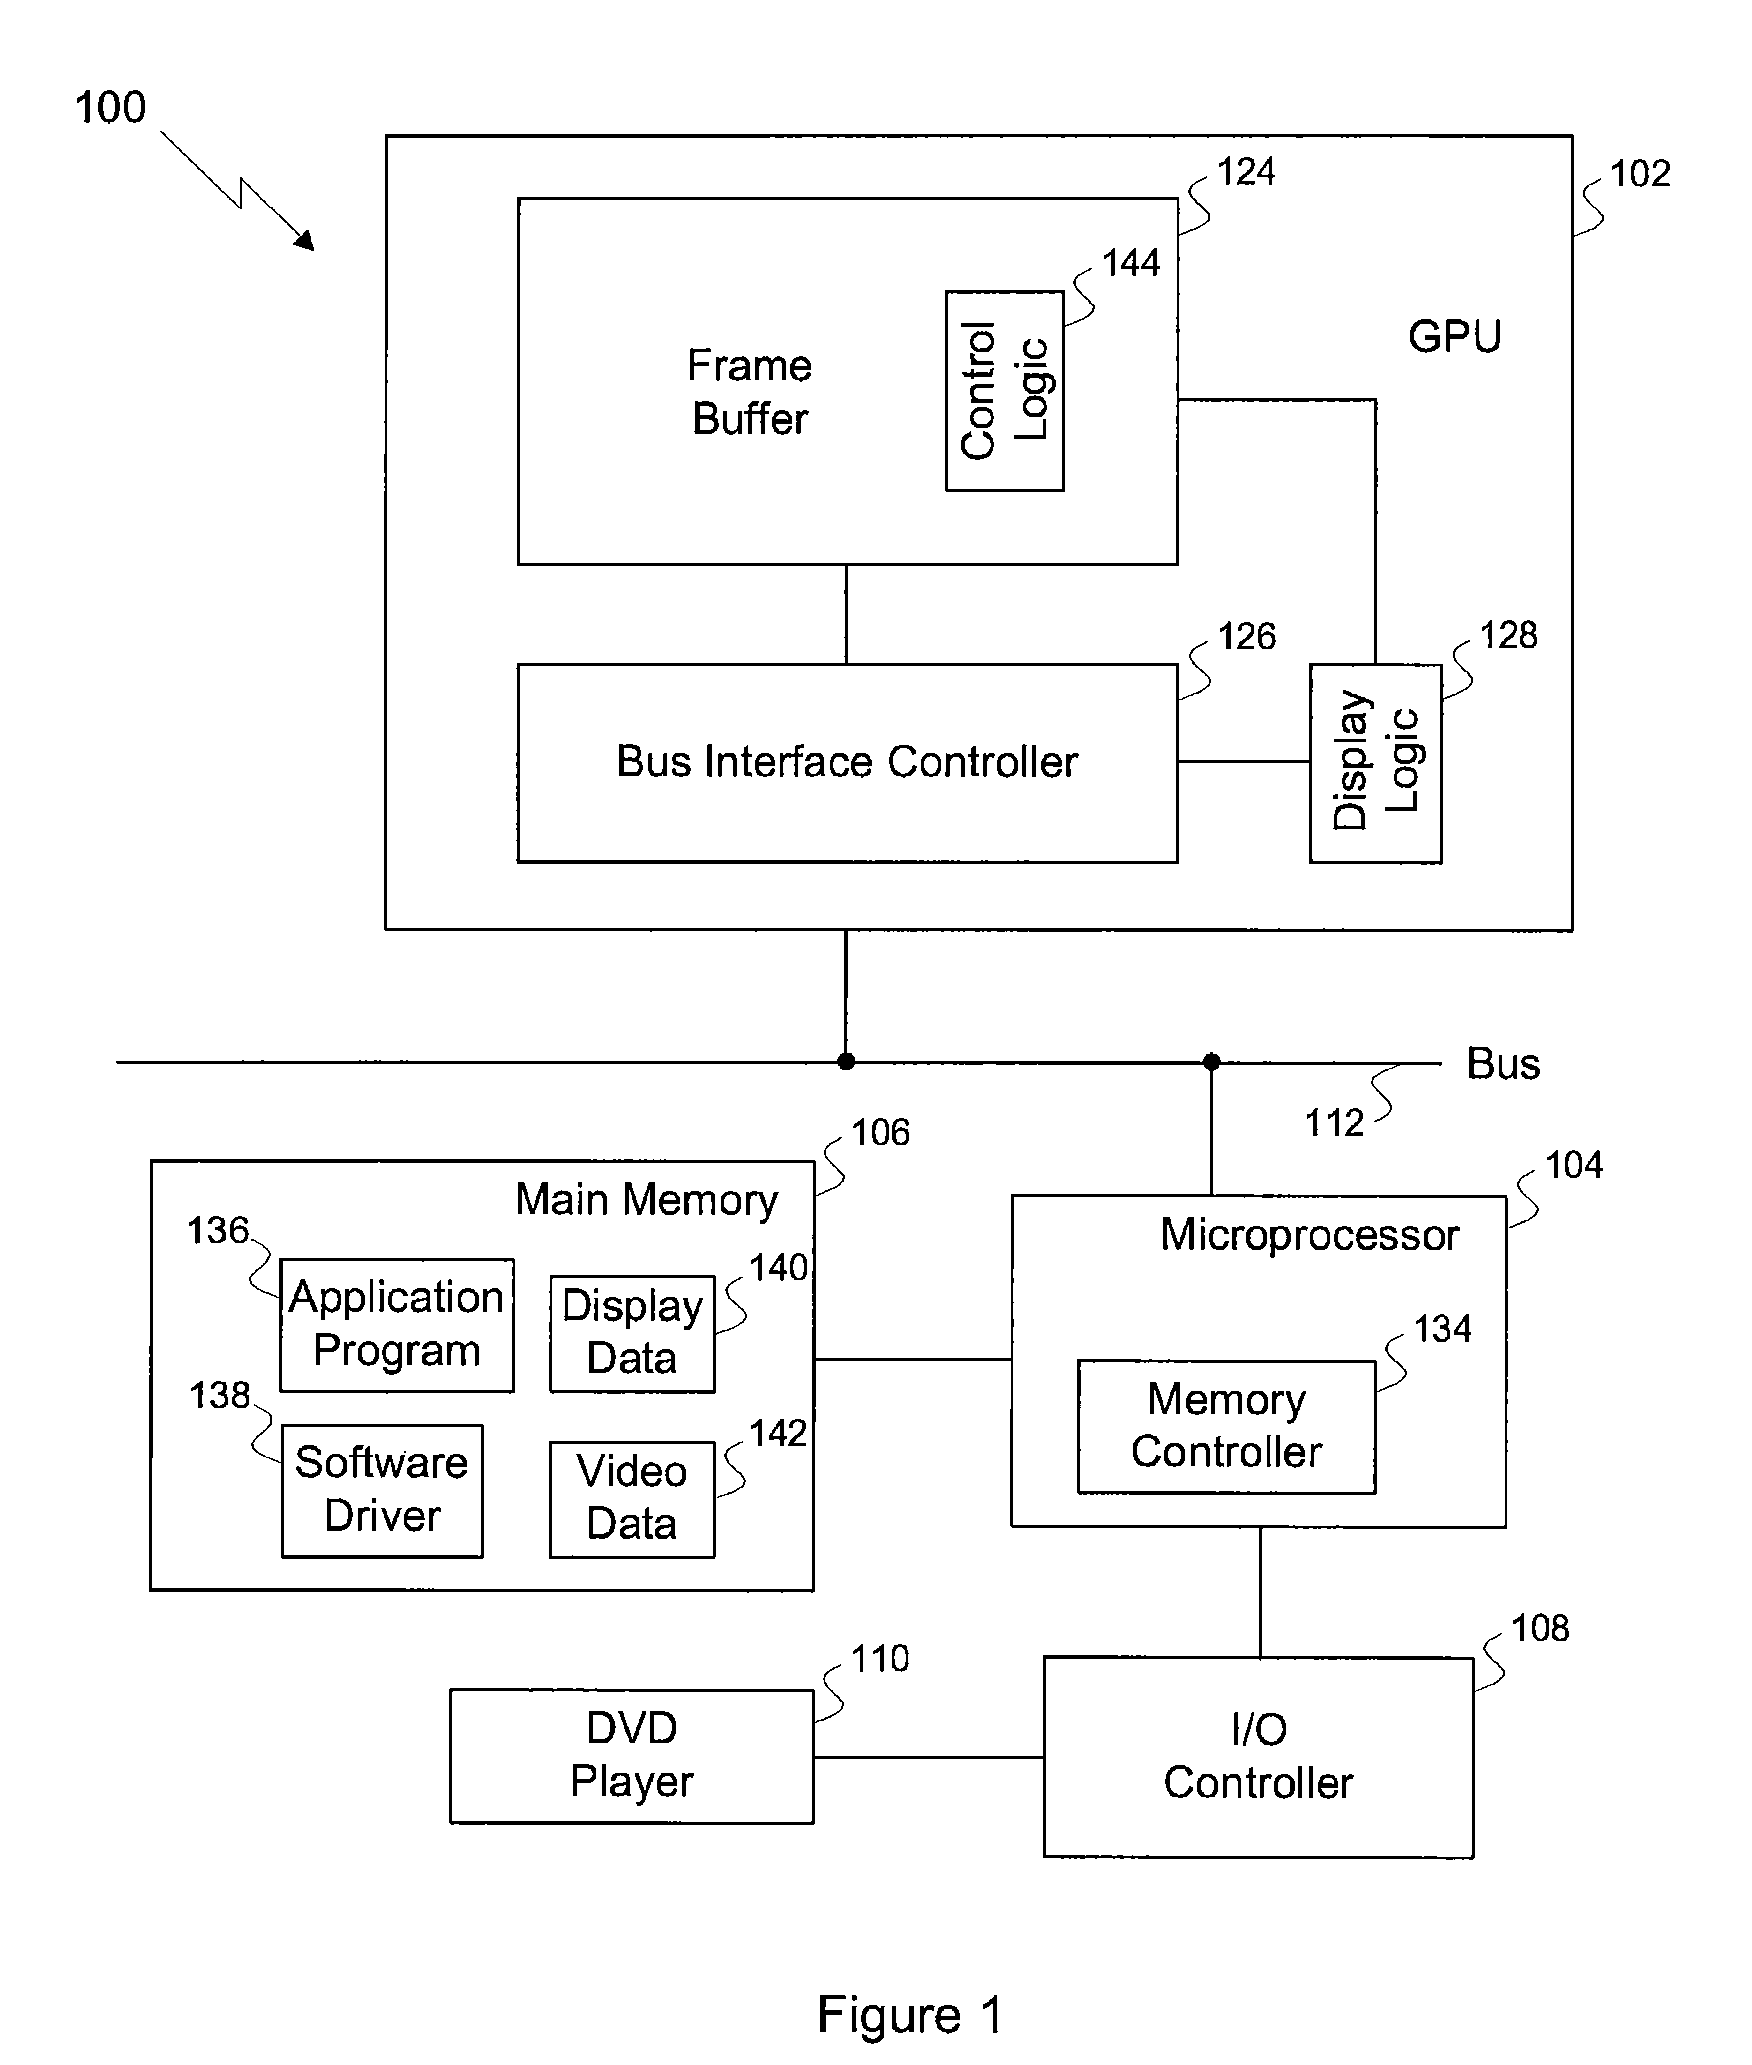 Power savings in a computing device during video playback